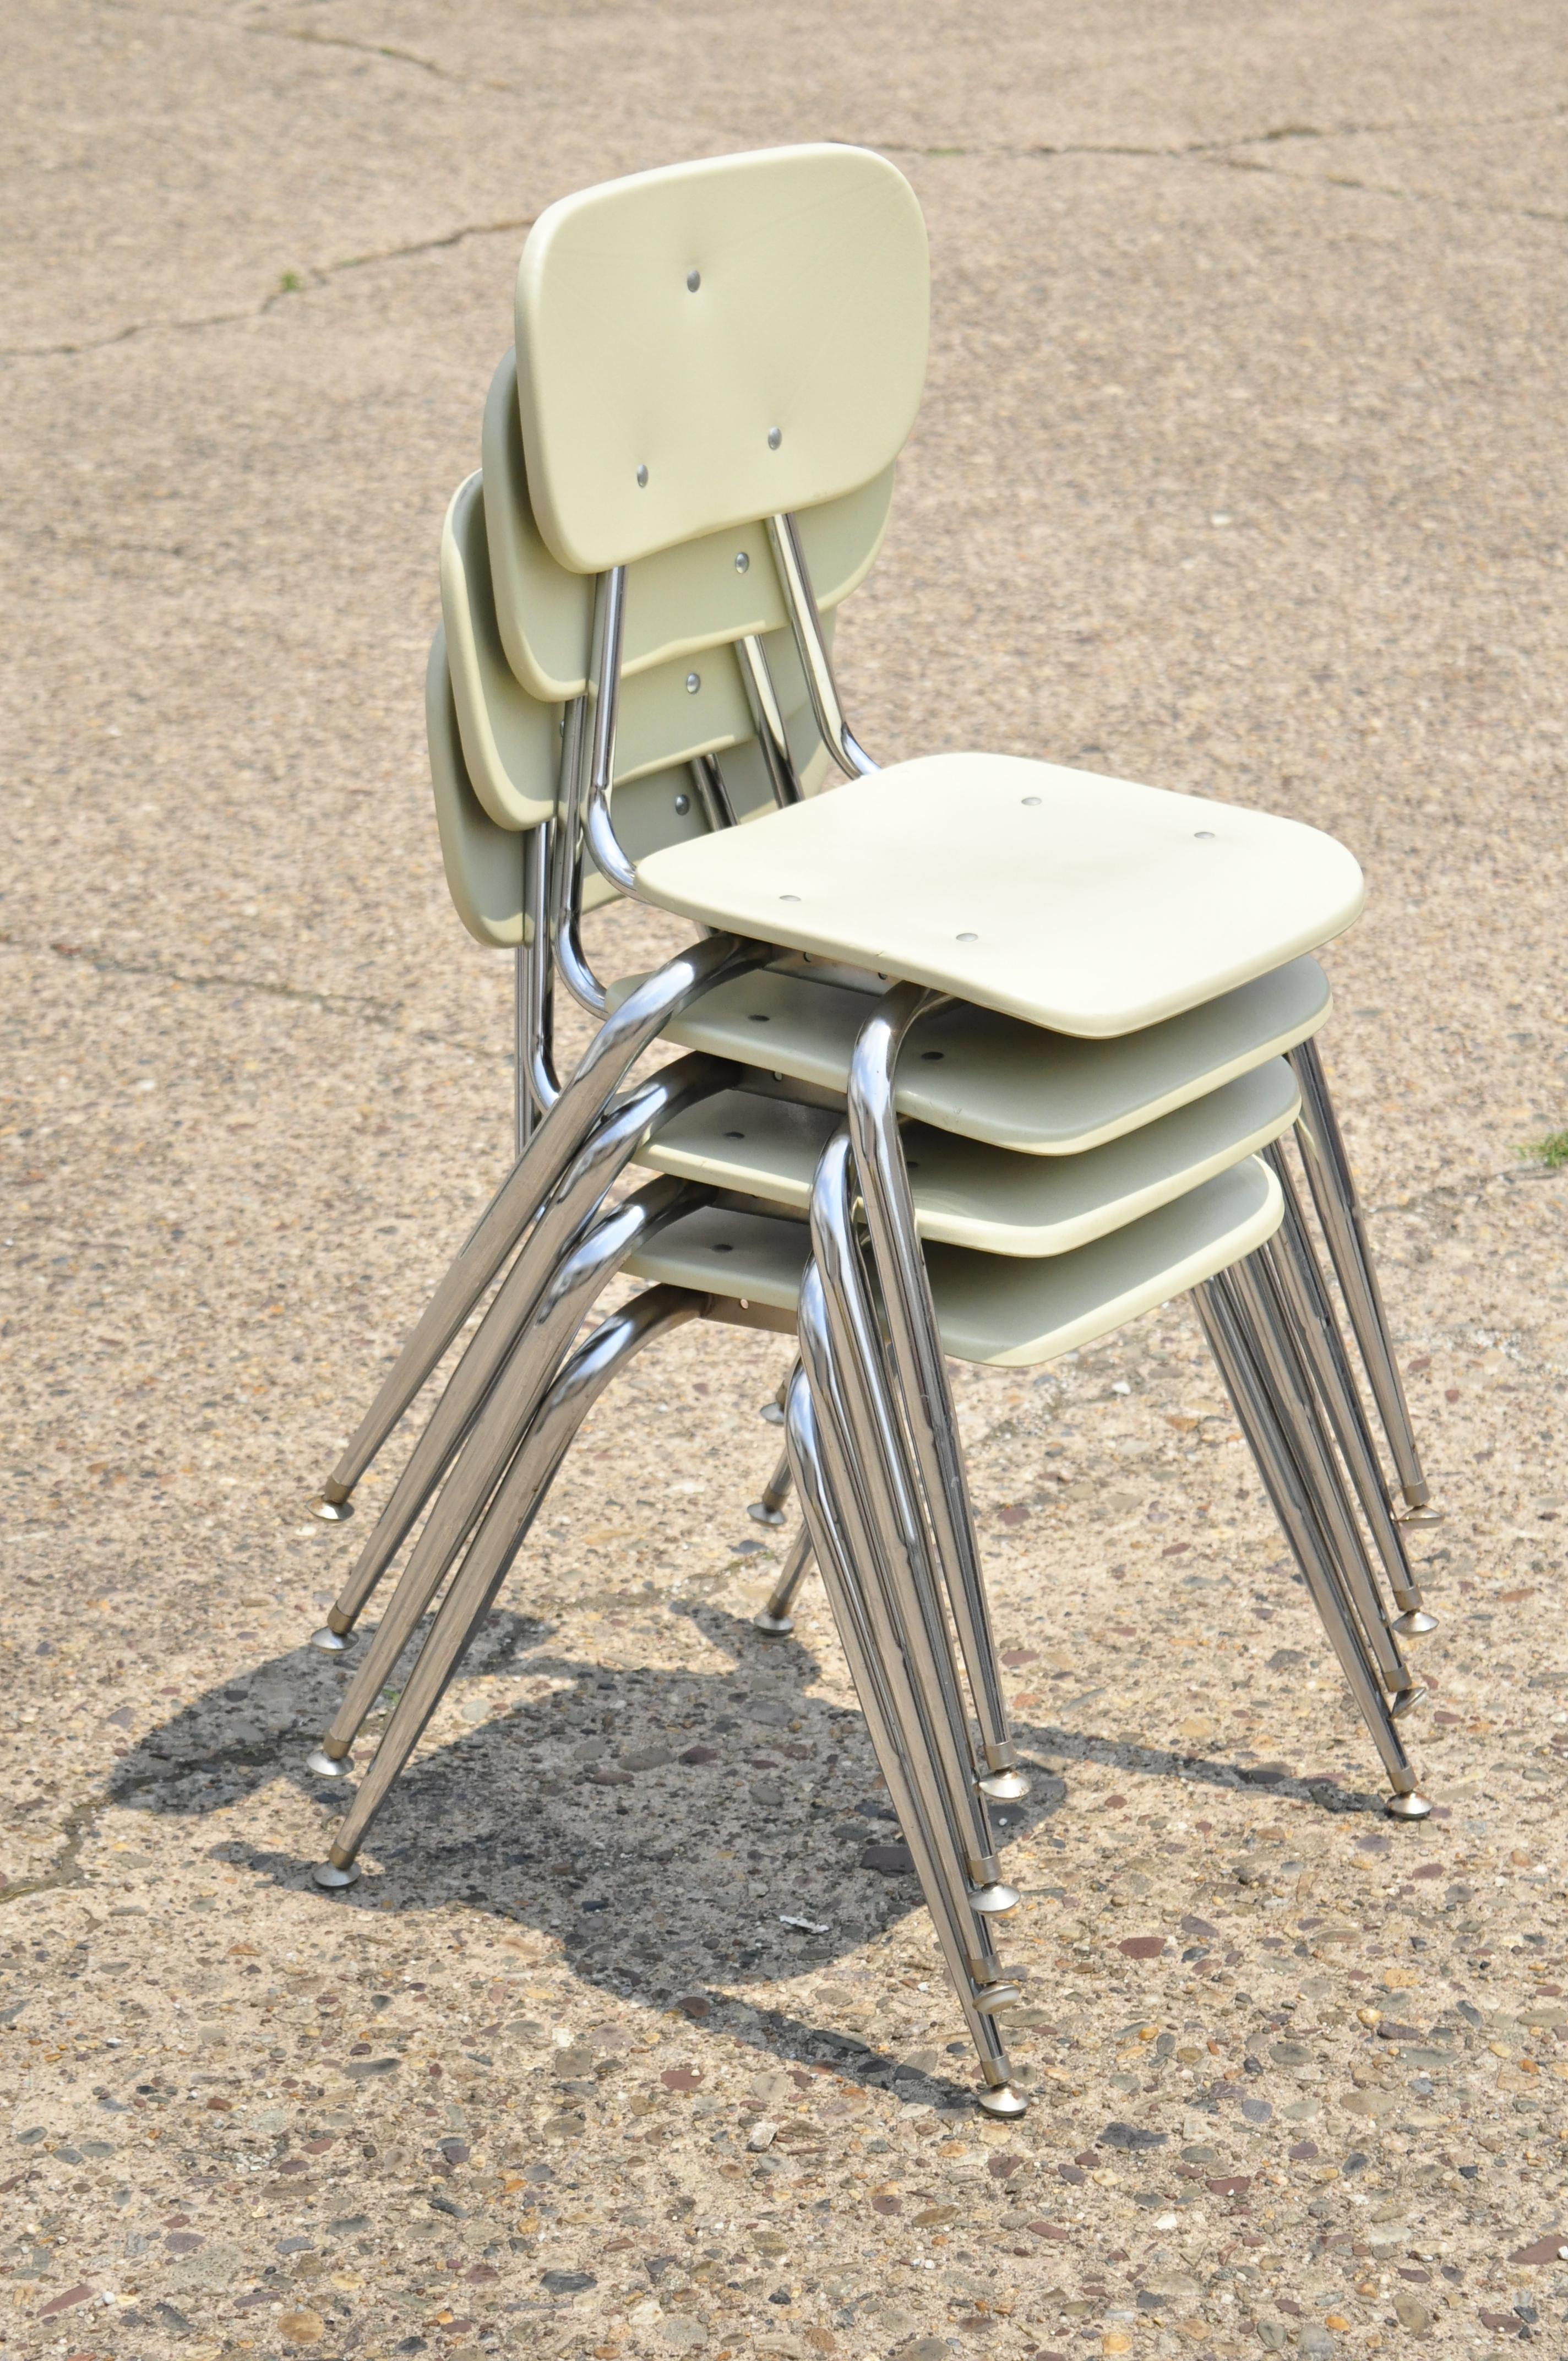 Vtg Beige Molded Plastic Chrome Metal Base Stacking School Side Chairs, Set of 4 For Sale 5